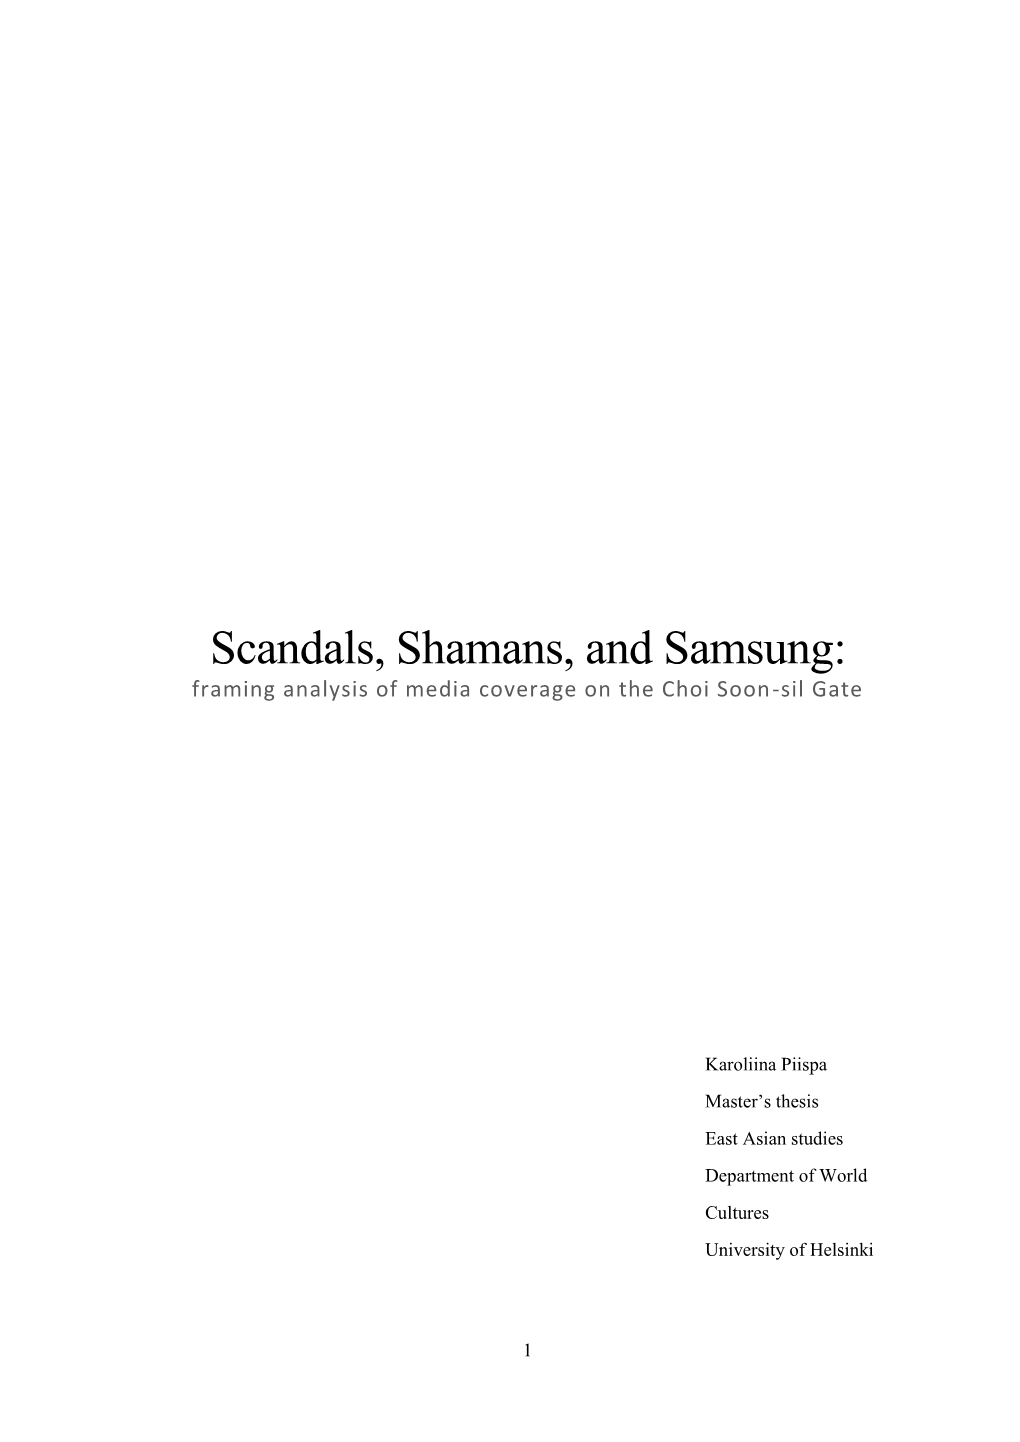 Scandals, Shamans, and Samsung: Framing Analysis of Media Coverage on the Choi Soon-Sil Gate